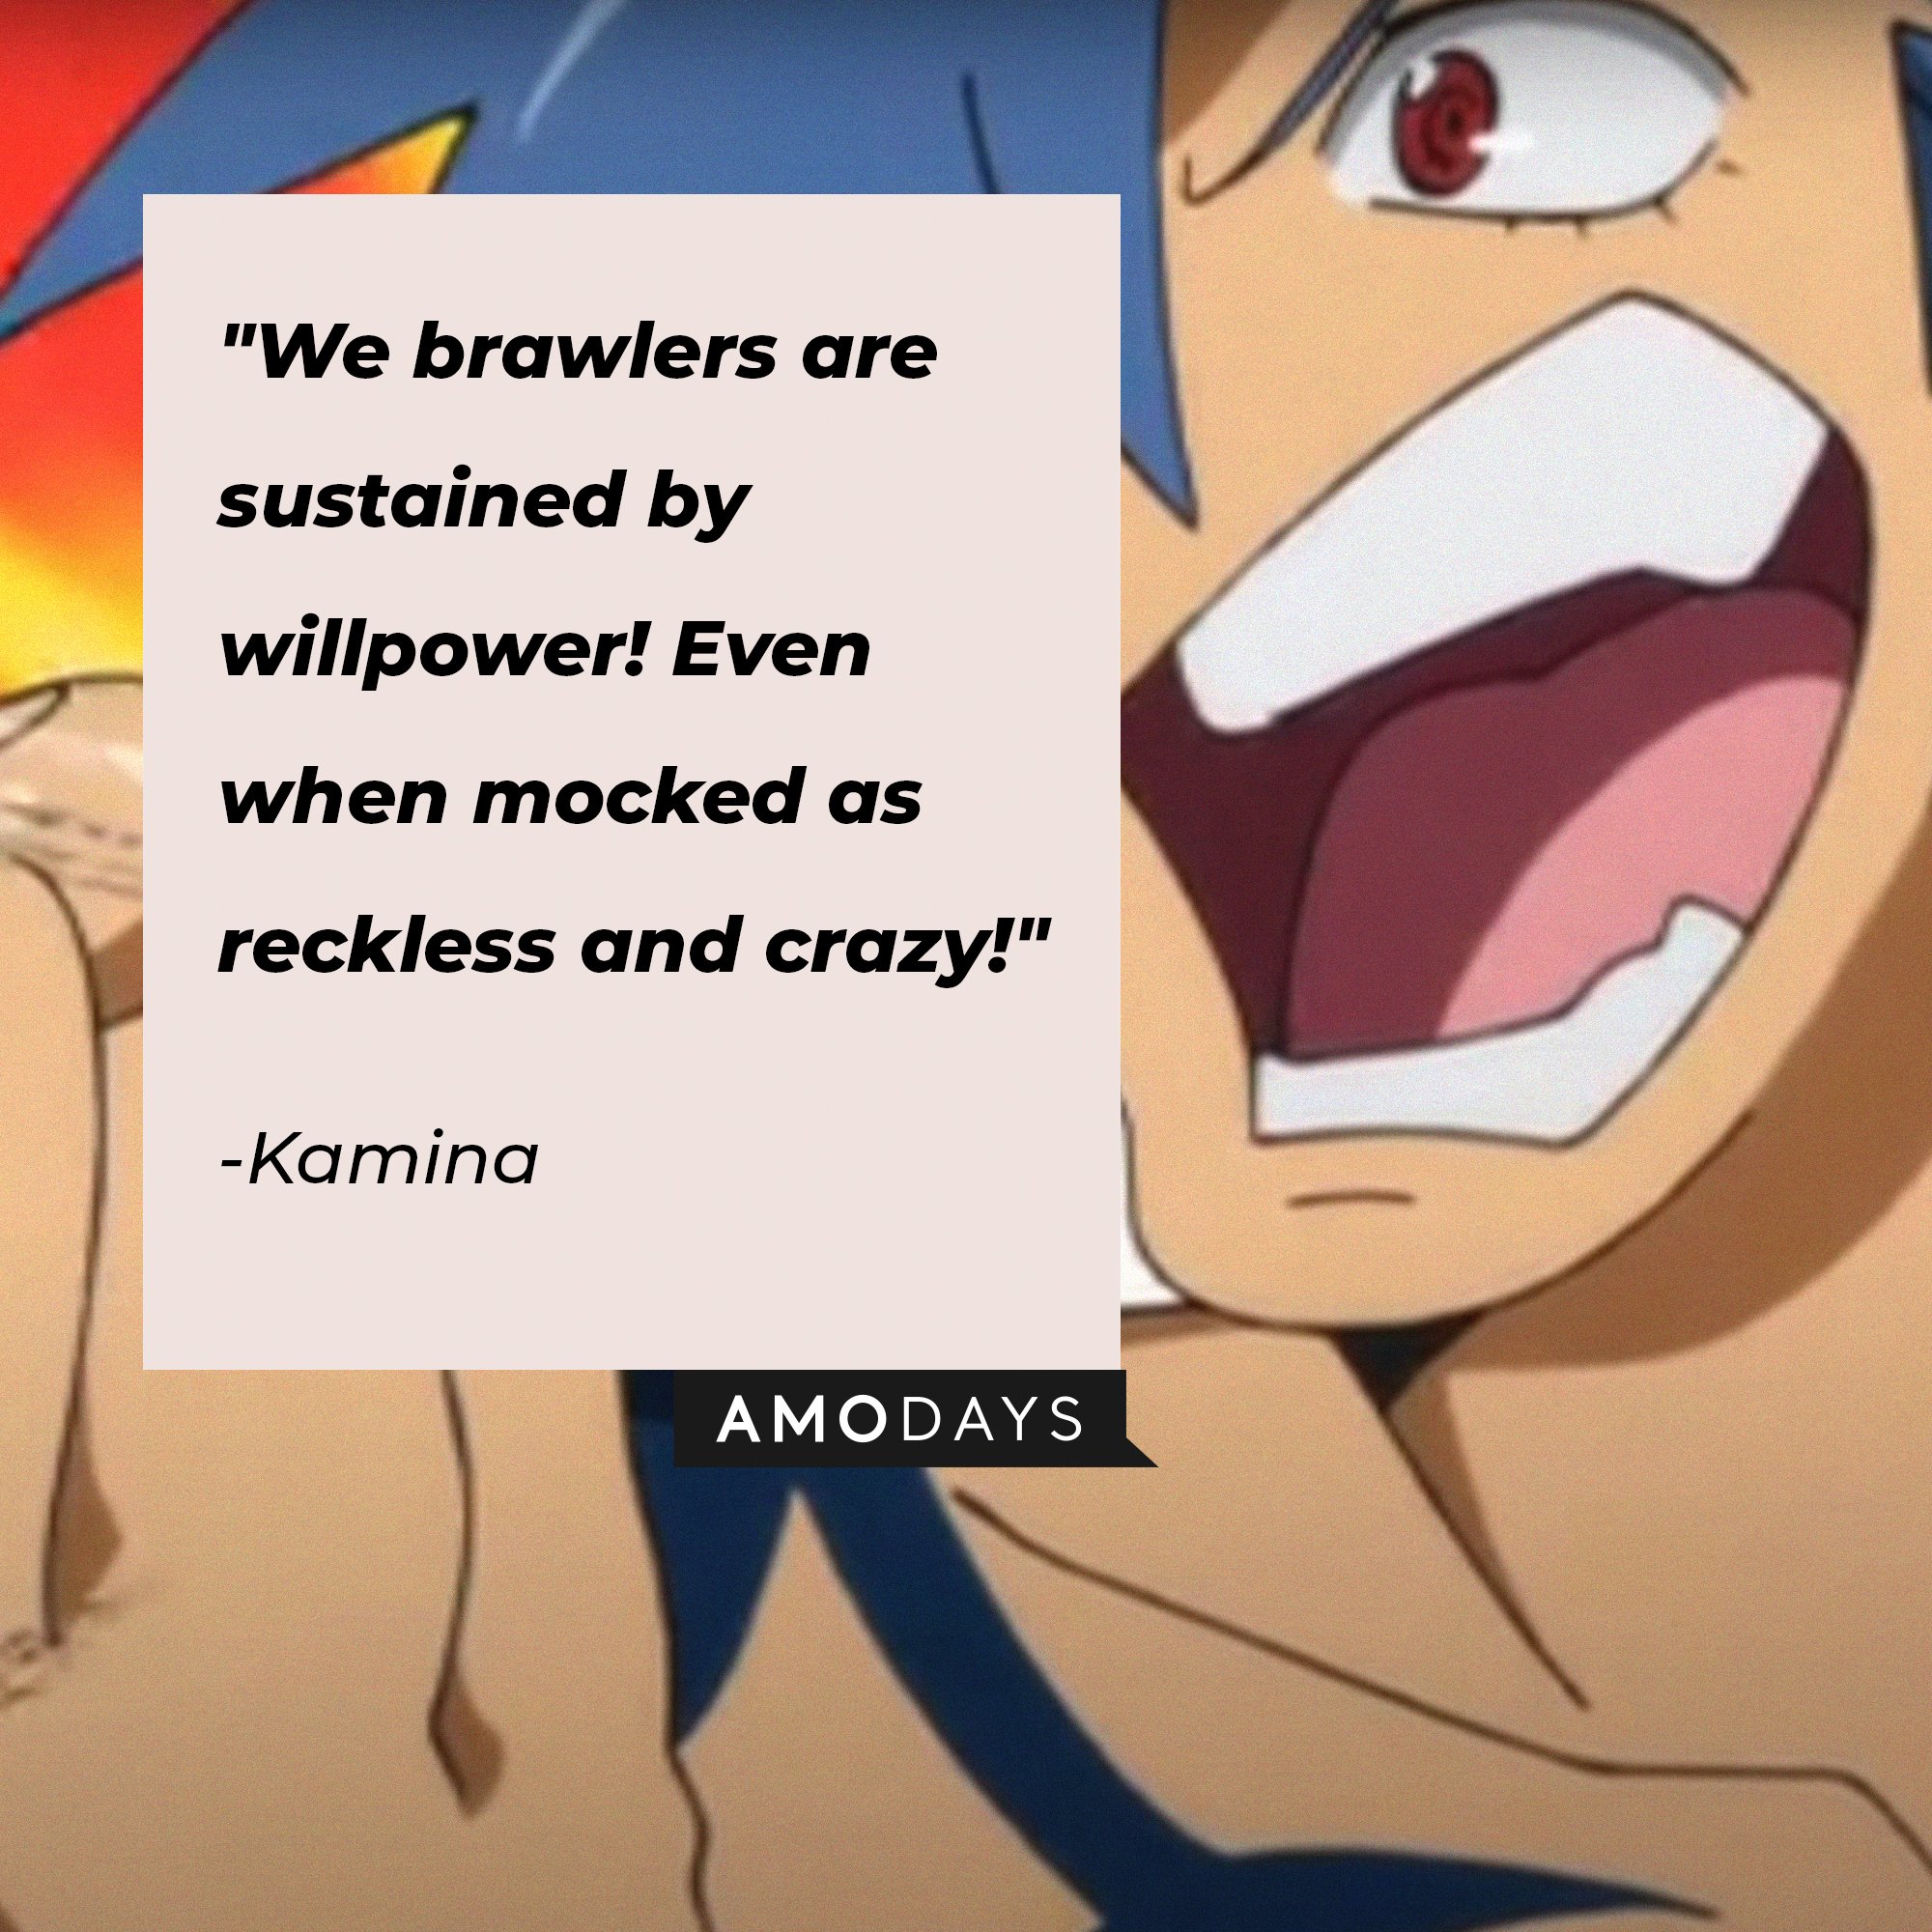 Kamina's quote: "We brawlers are sustained by willpower! Even when mocked as reckless and crazy!" | Image: AmoDays    